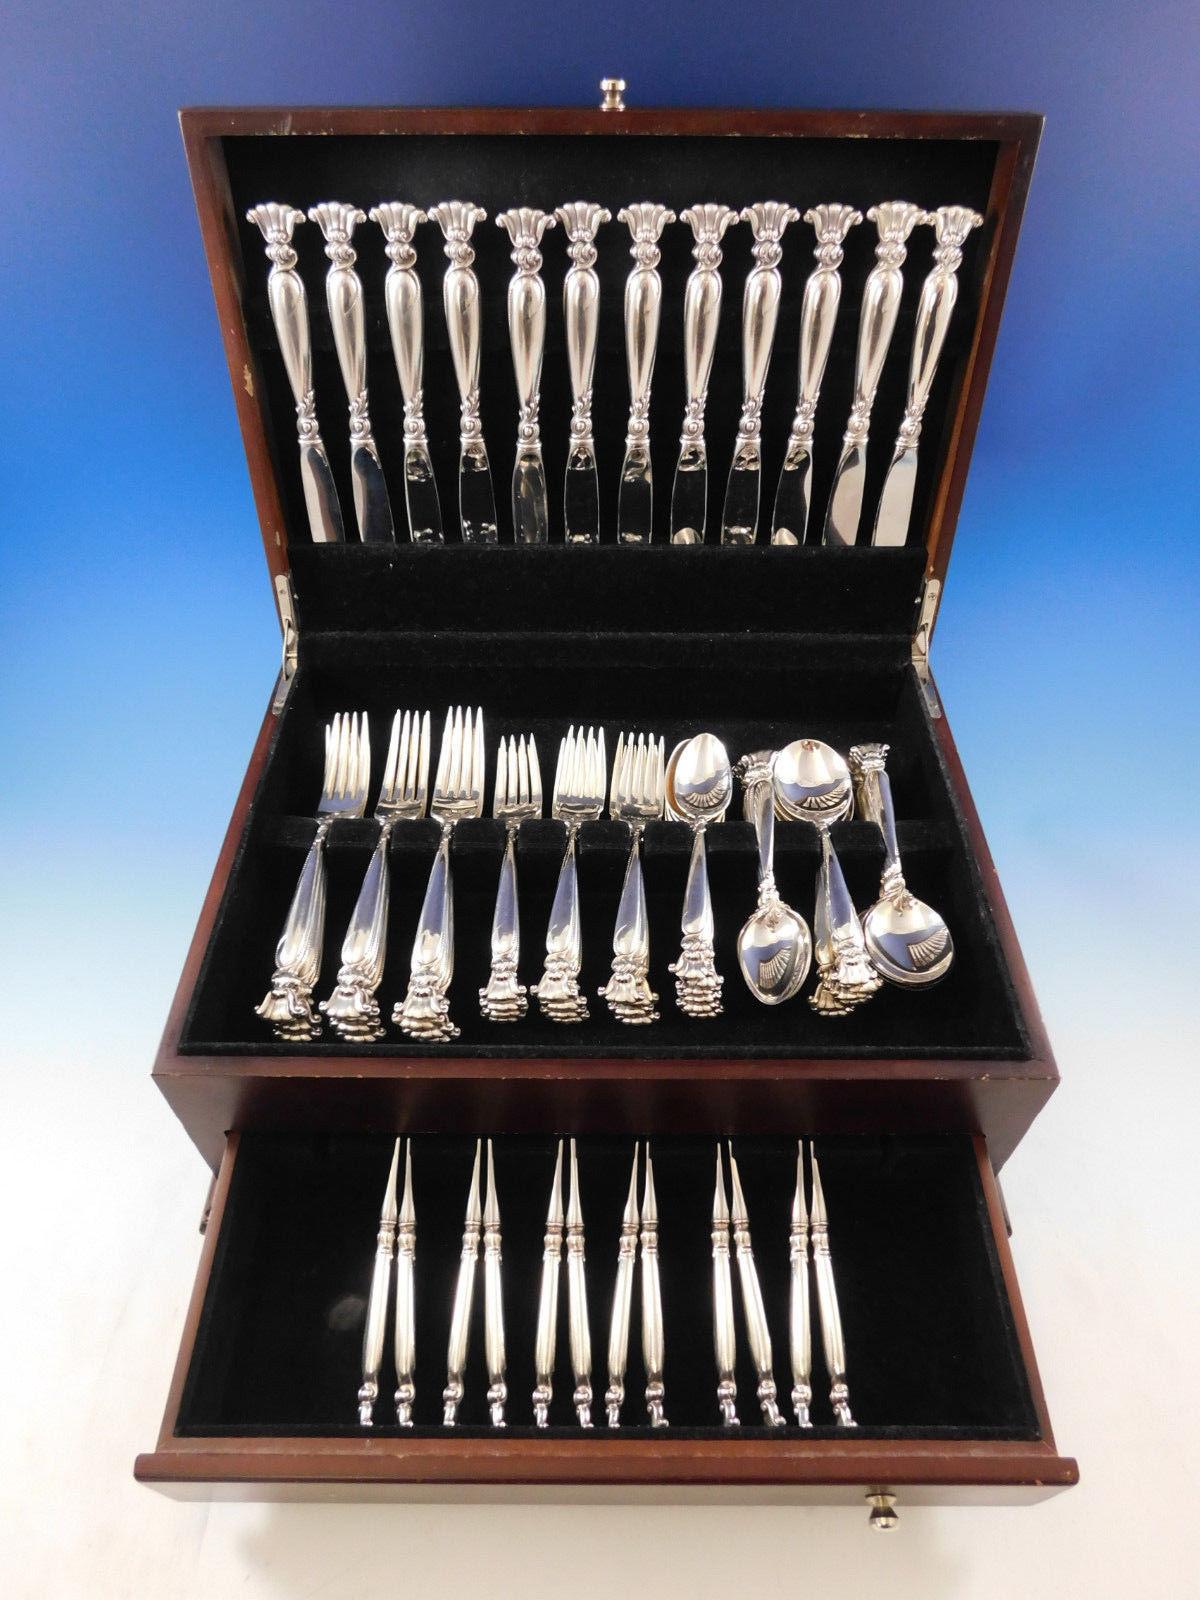 Romance of the sea by Wallace sterling silver flatware set, 72 pieces. This set includes:

12 knives, 9 1/8